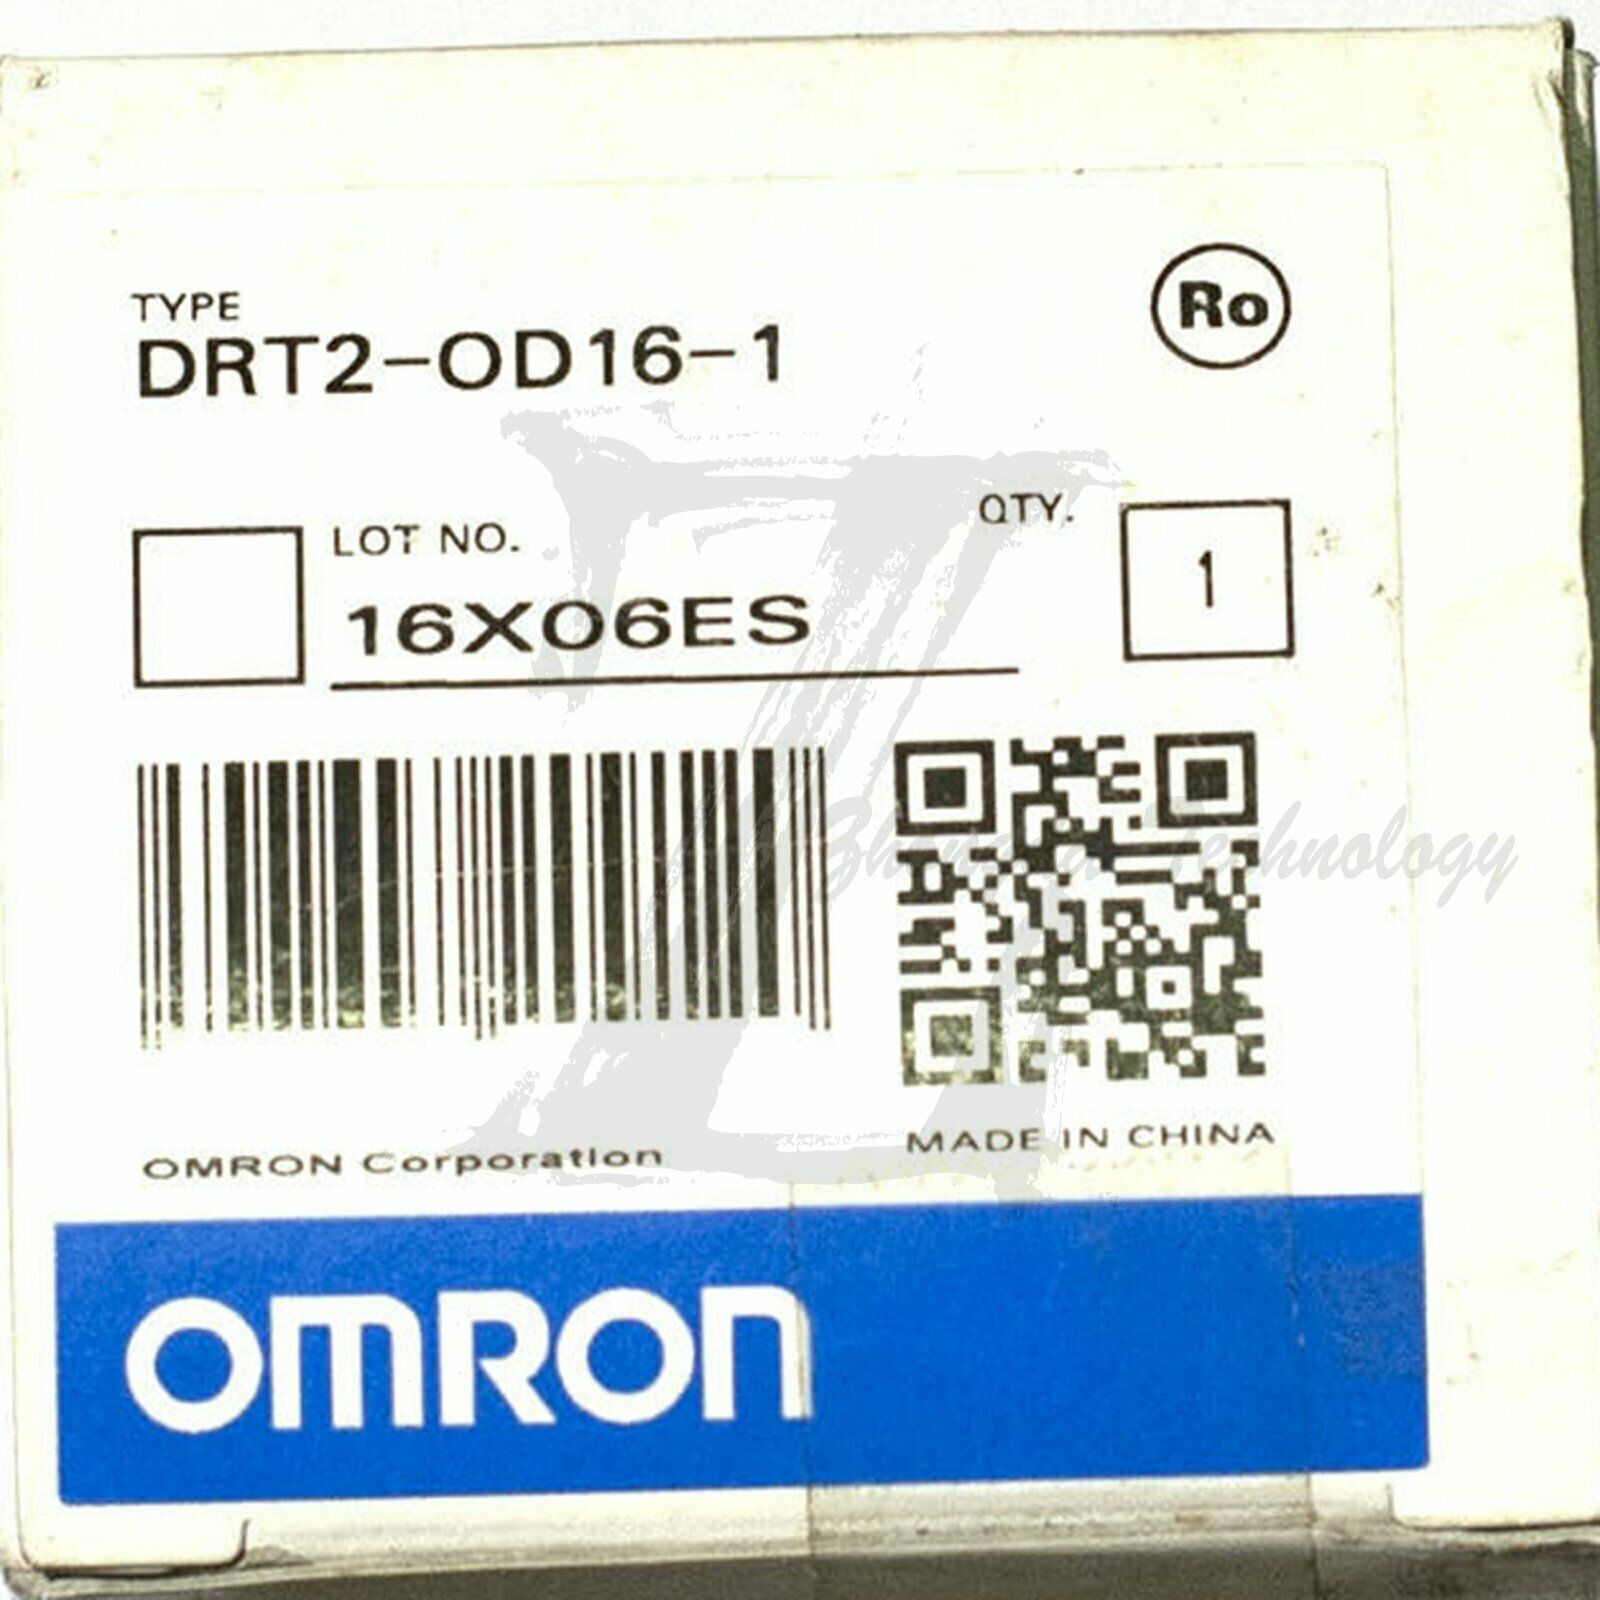 1pc new Omron DRT2-OD16-1 module one year warranty KOEED 101-200, 80%, import_2020_10_10_031751, Omron, Other